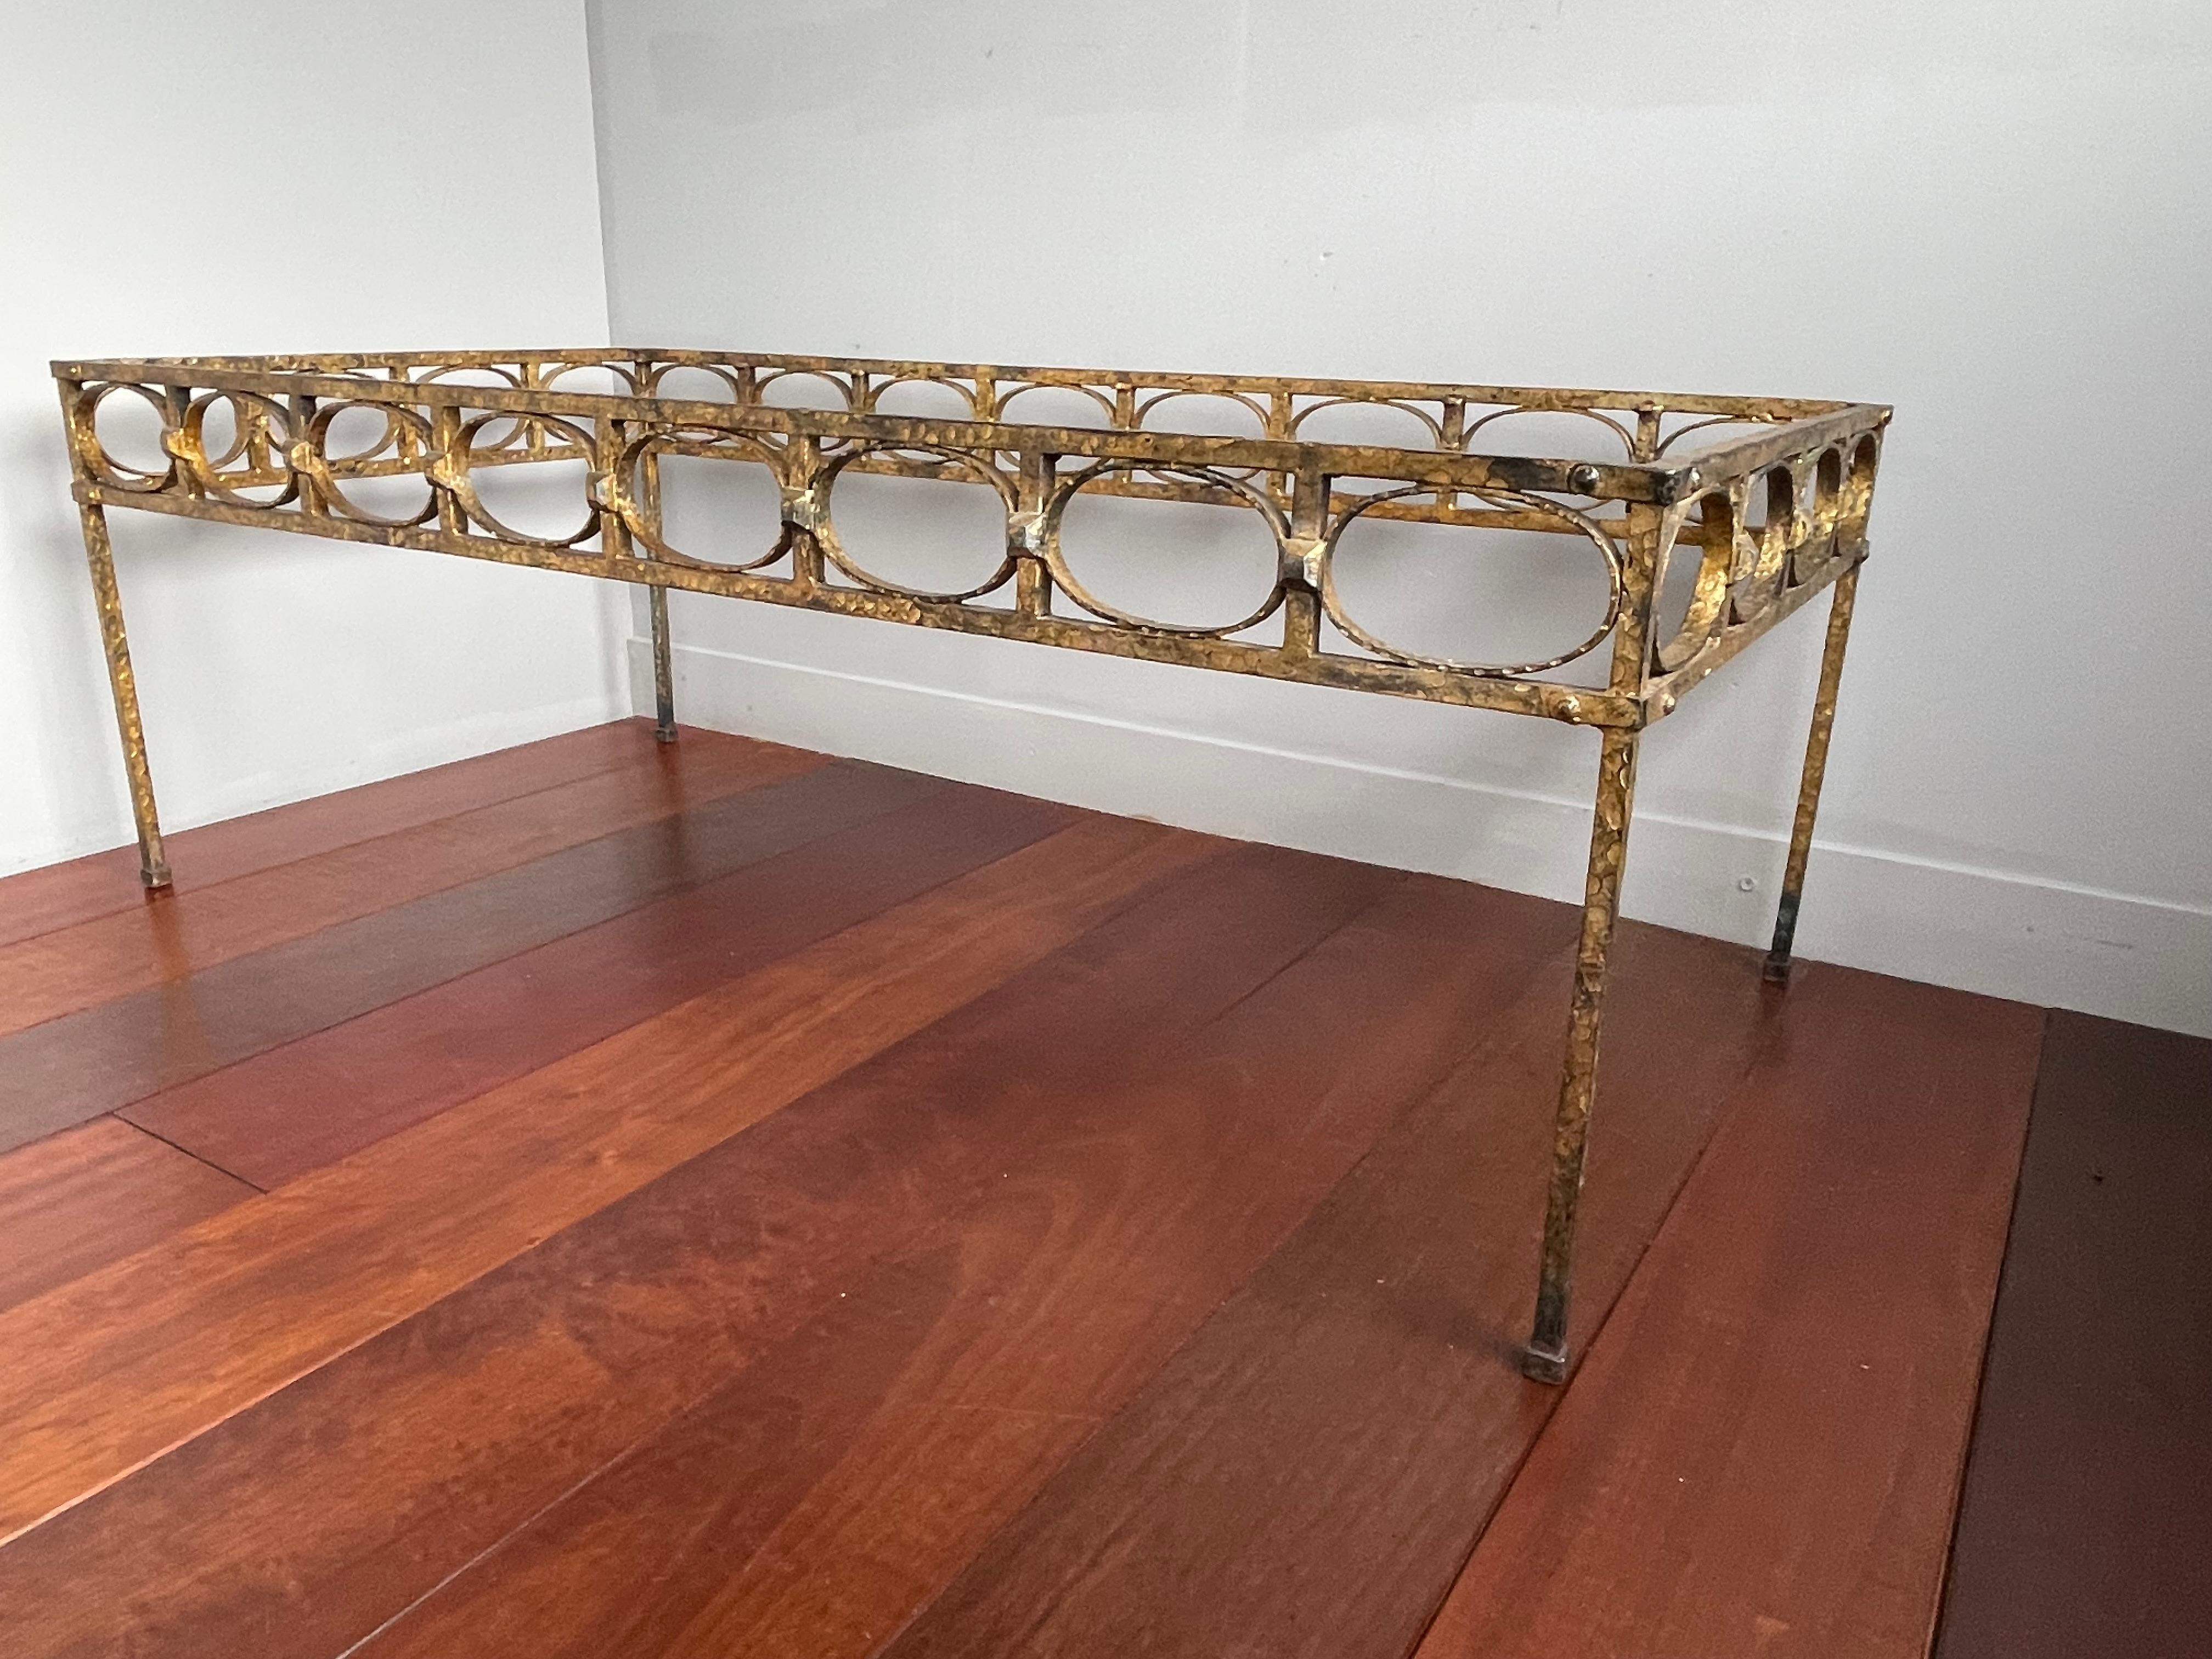 Stunning Midcentury Modern Gilt Wrought Iron Coffee Table Base by Ferro Art 1950 For Sale 13